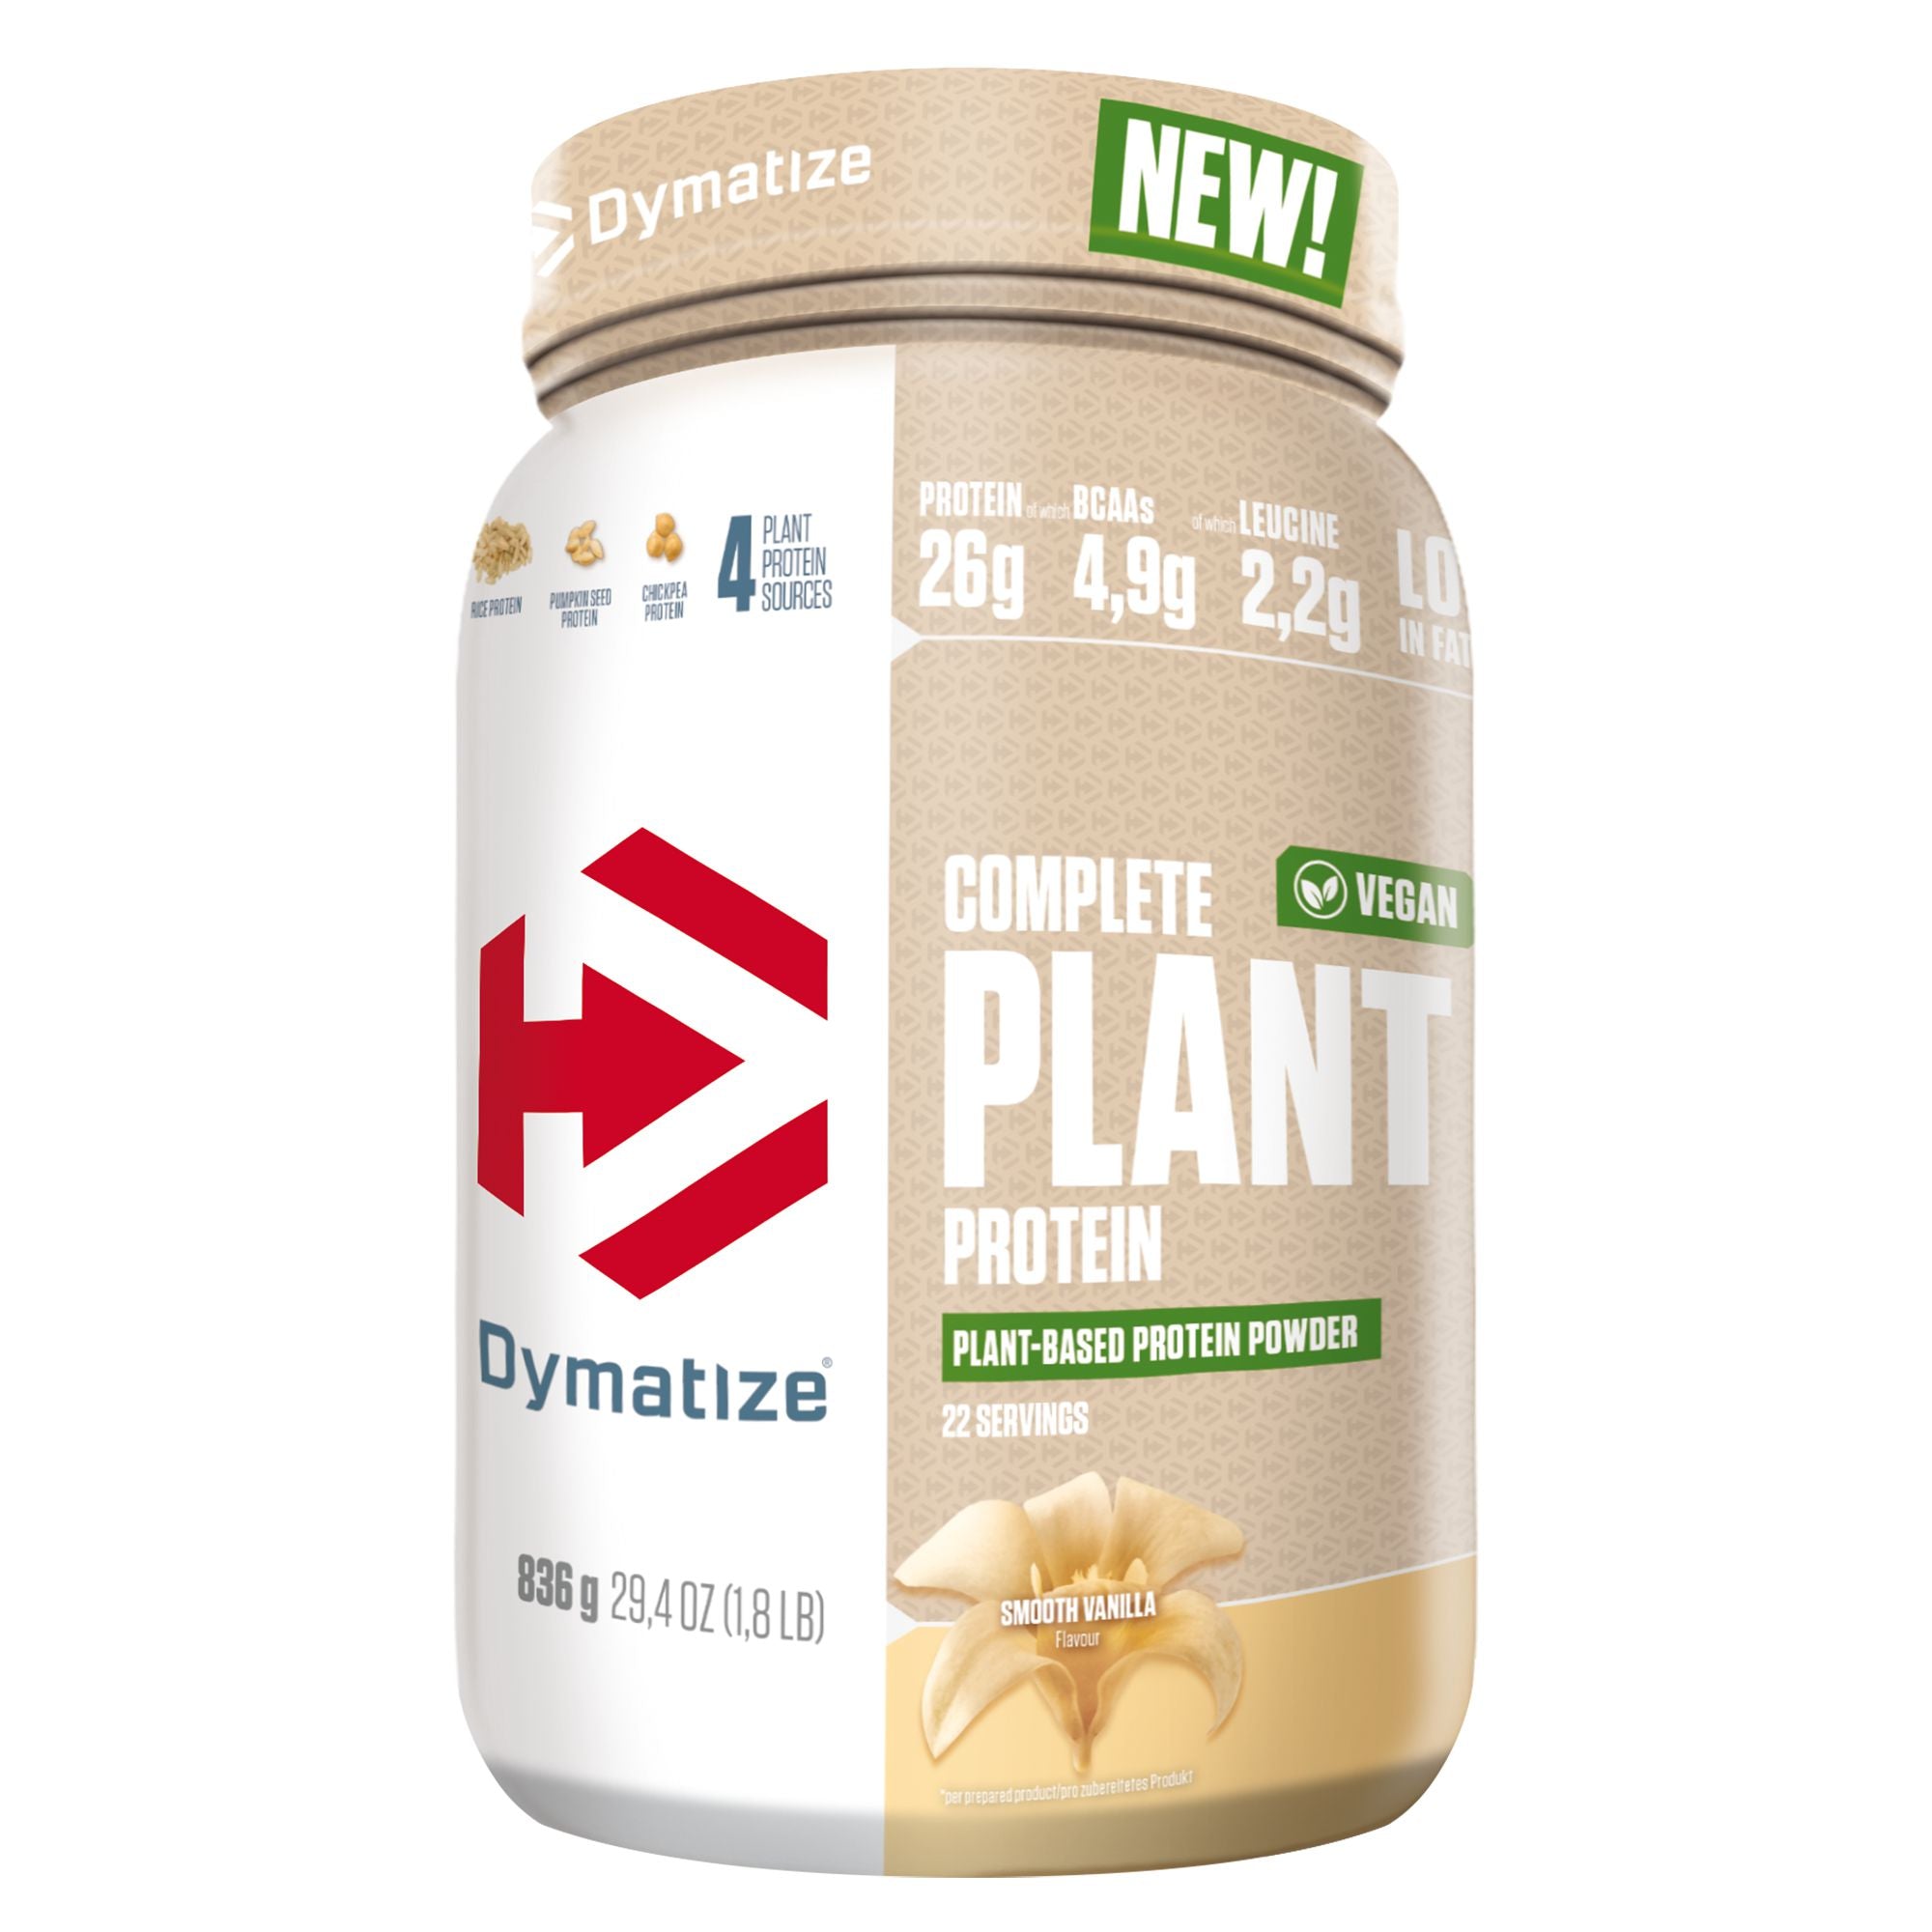 Dymatize Nutrition Complete Plant Protein 836g